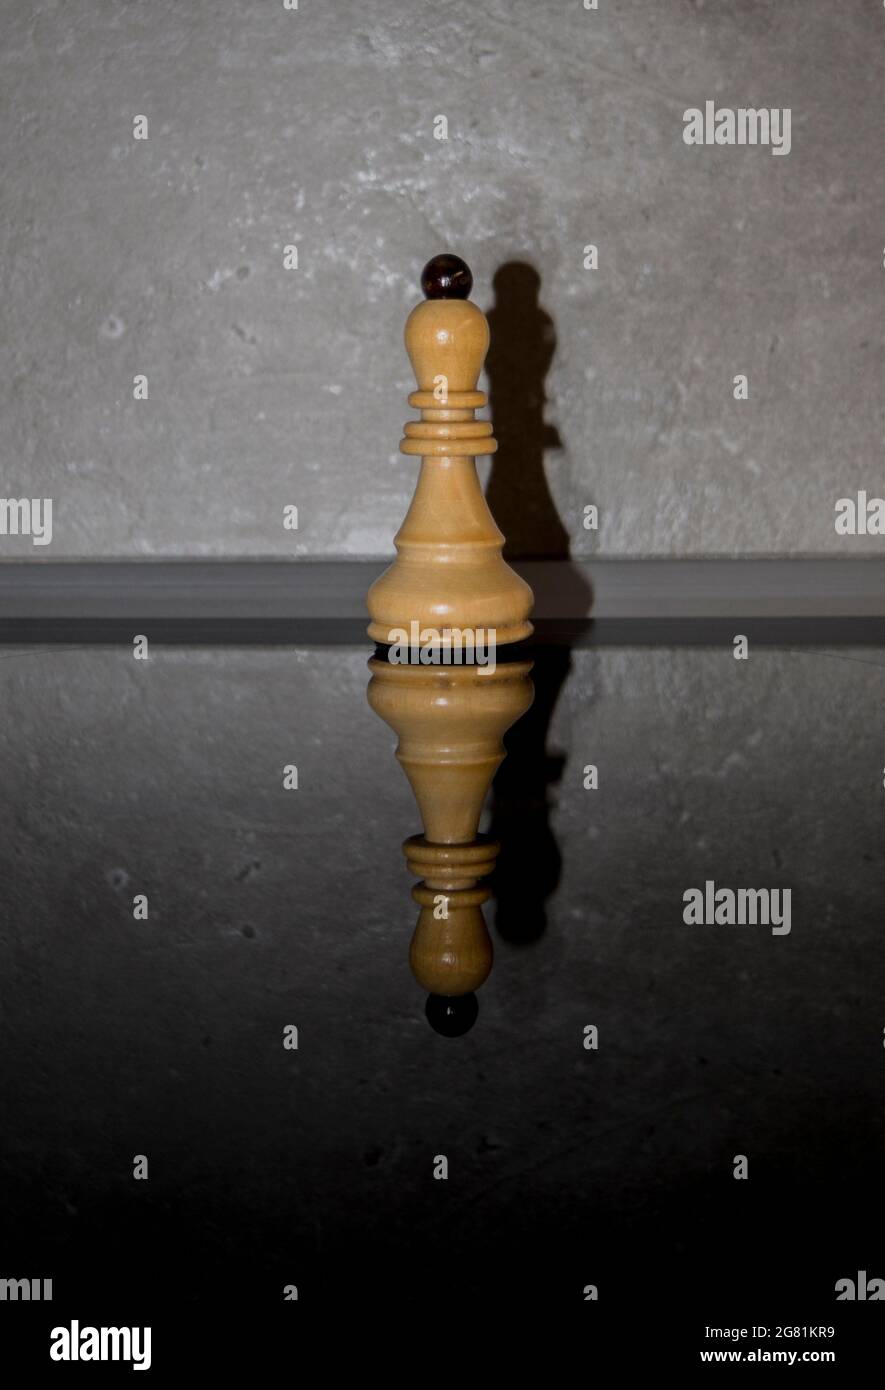 Wooden white chess piece, bishop on dark mirror glass with concrete wall background. Games, sports and recreation idea. Stock Photo